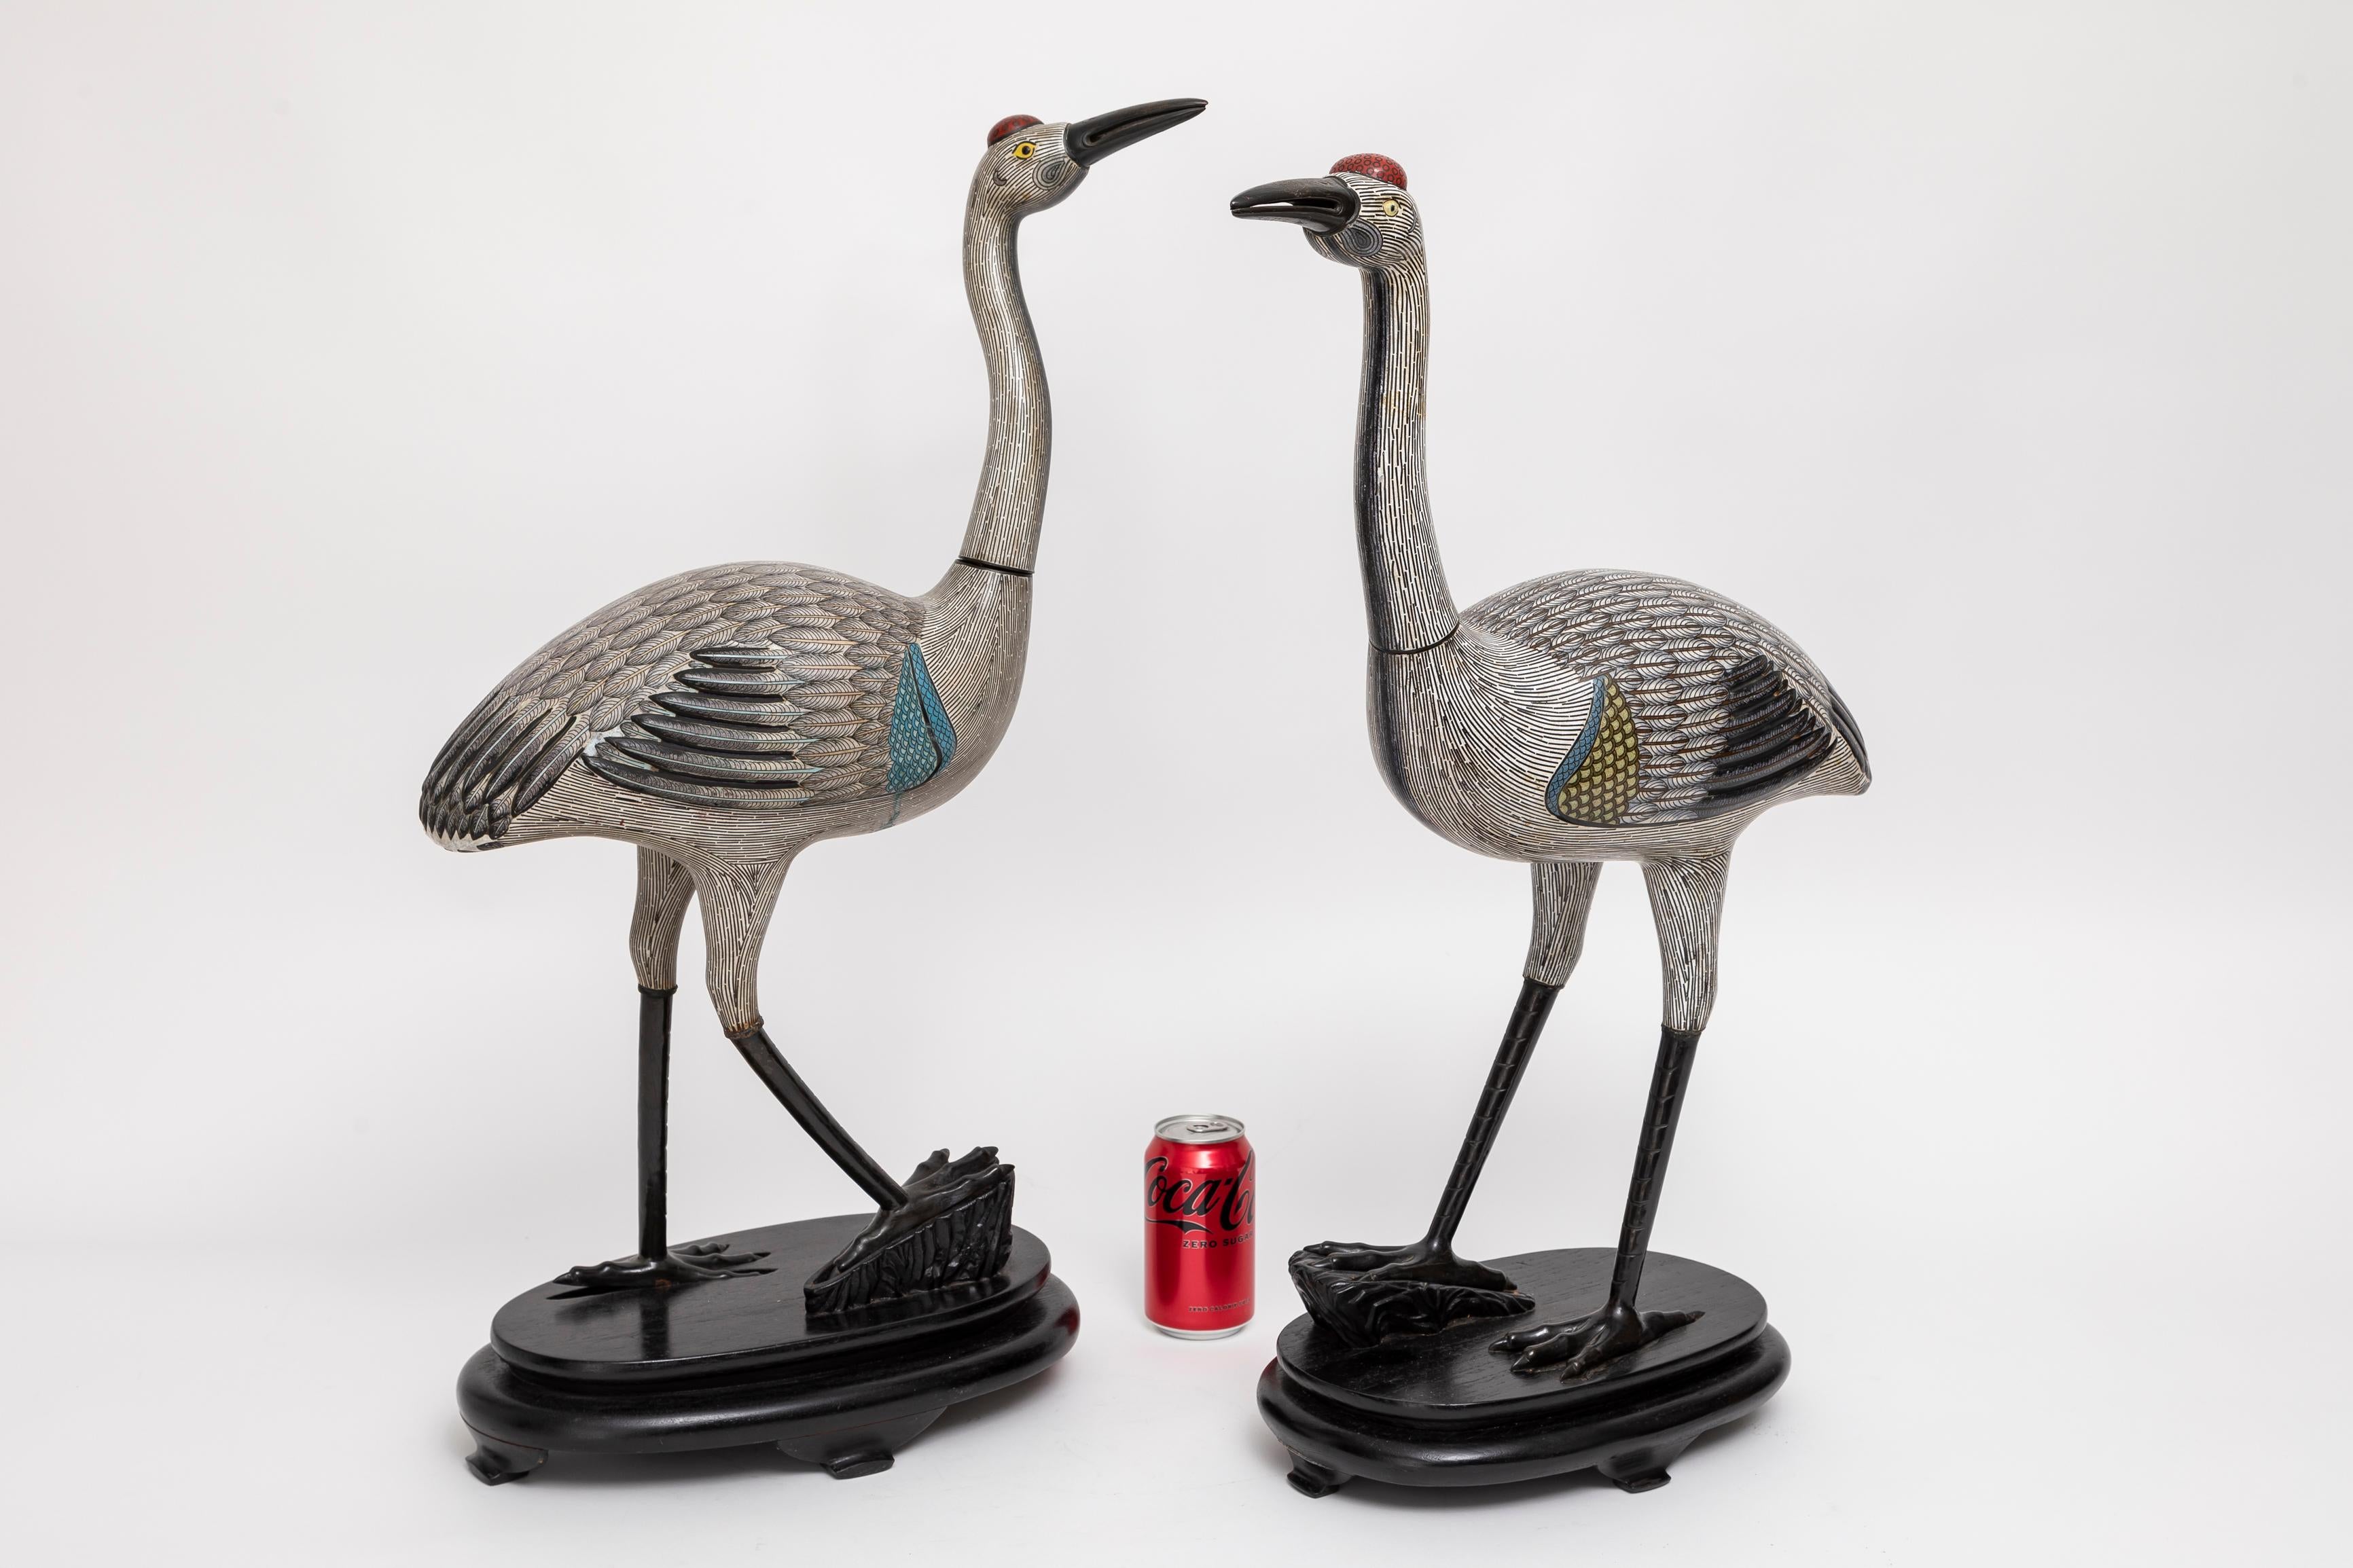 Bronze A Marvelous Pair of Chinese Cloisonné Figures of Cranes on Stands, Qing Dynasty